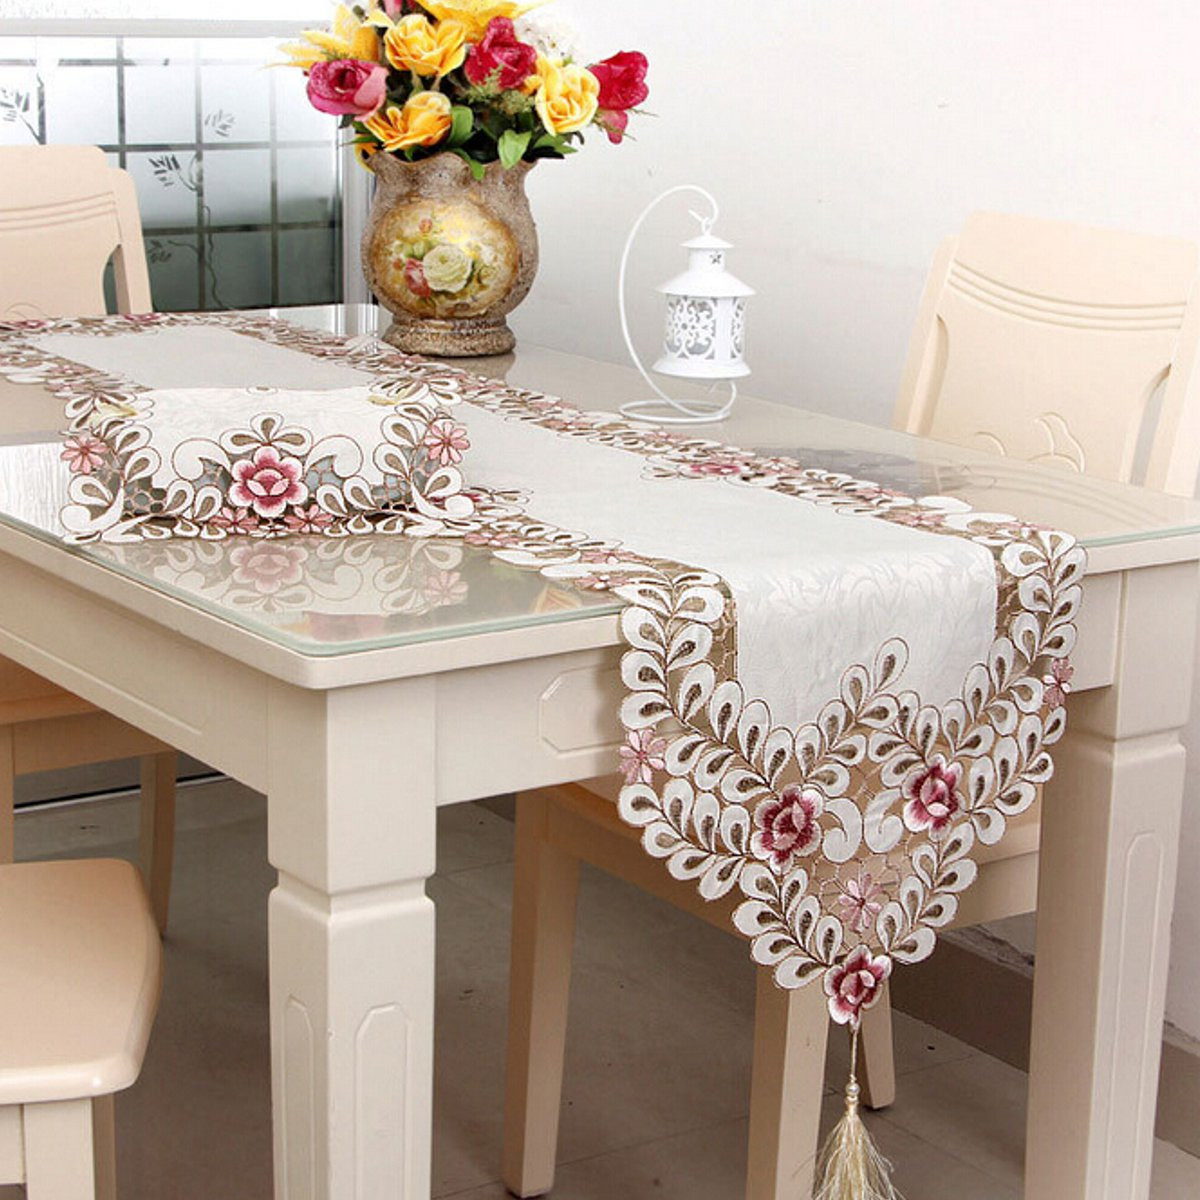 Four Size Pastoral Table Runner Flower Tablecloth Wedding Party Home Decorative Mat